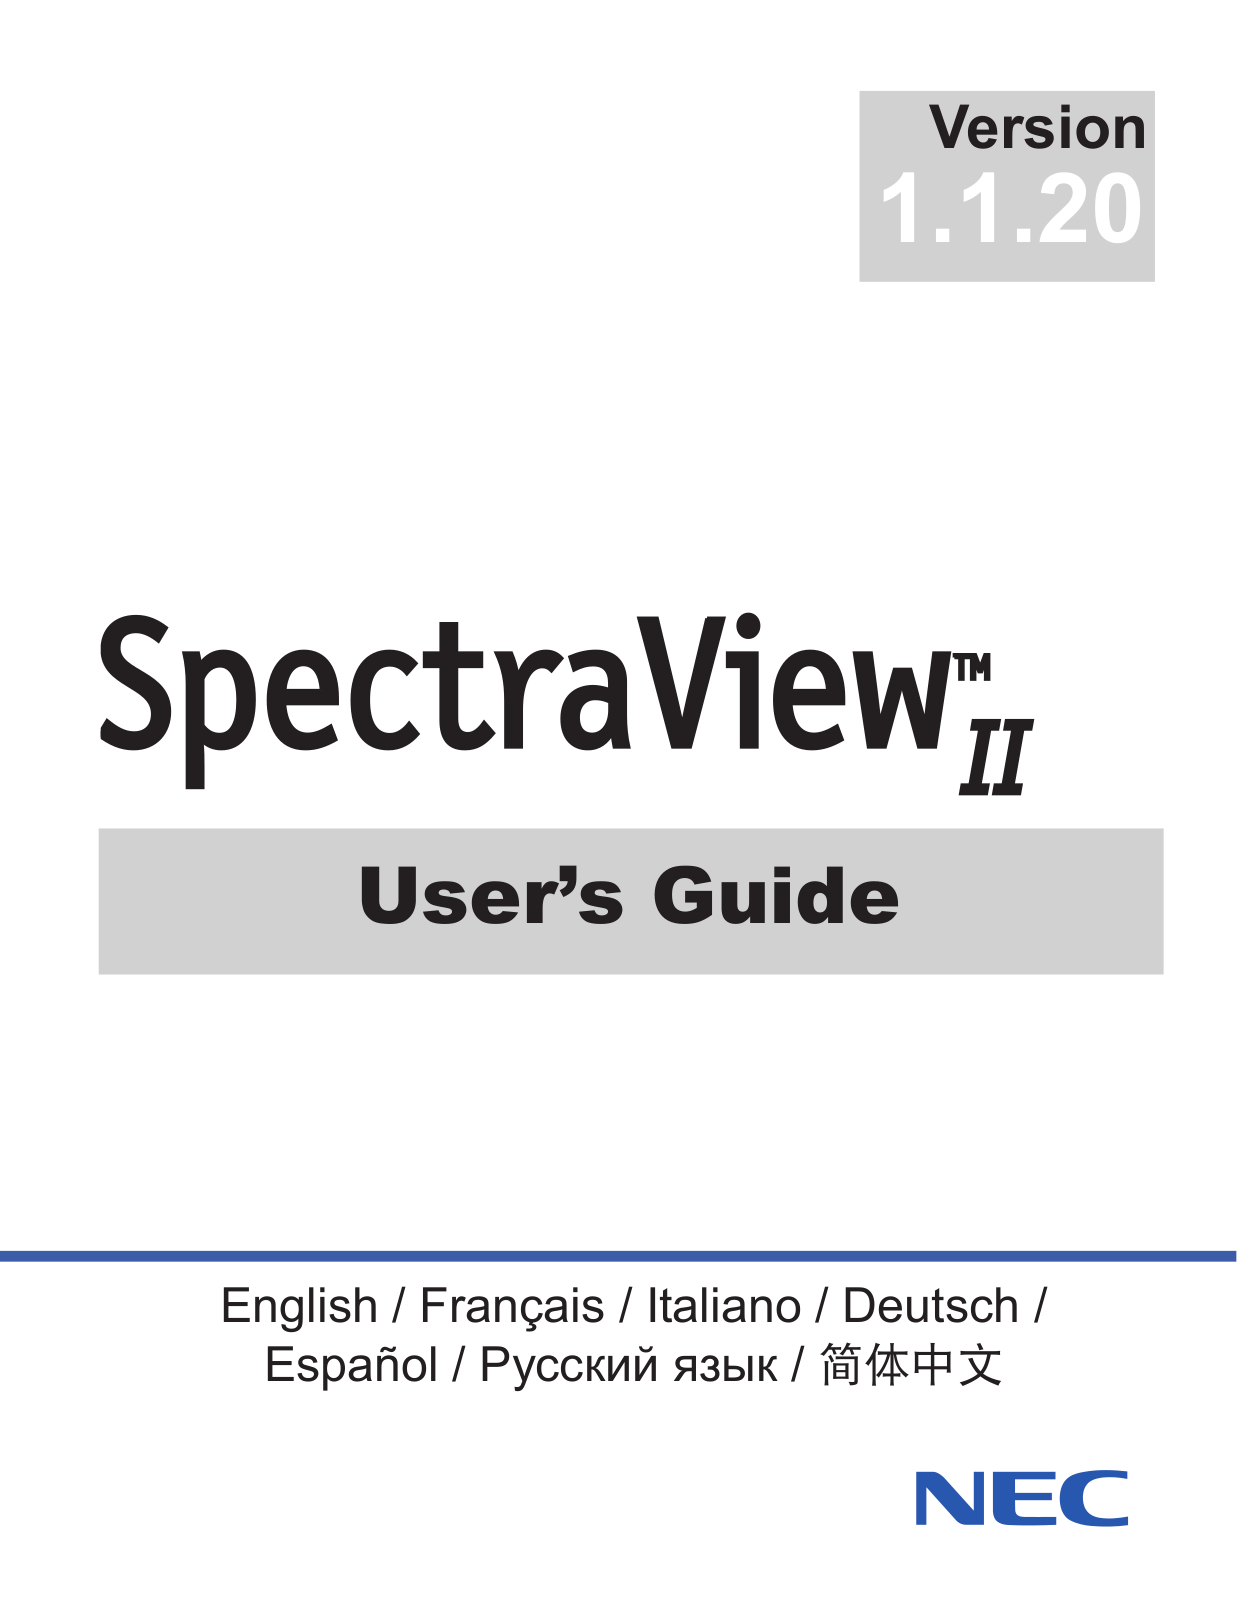 NEC SpectraViewII User's Guide